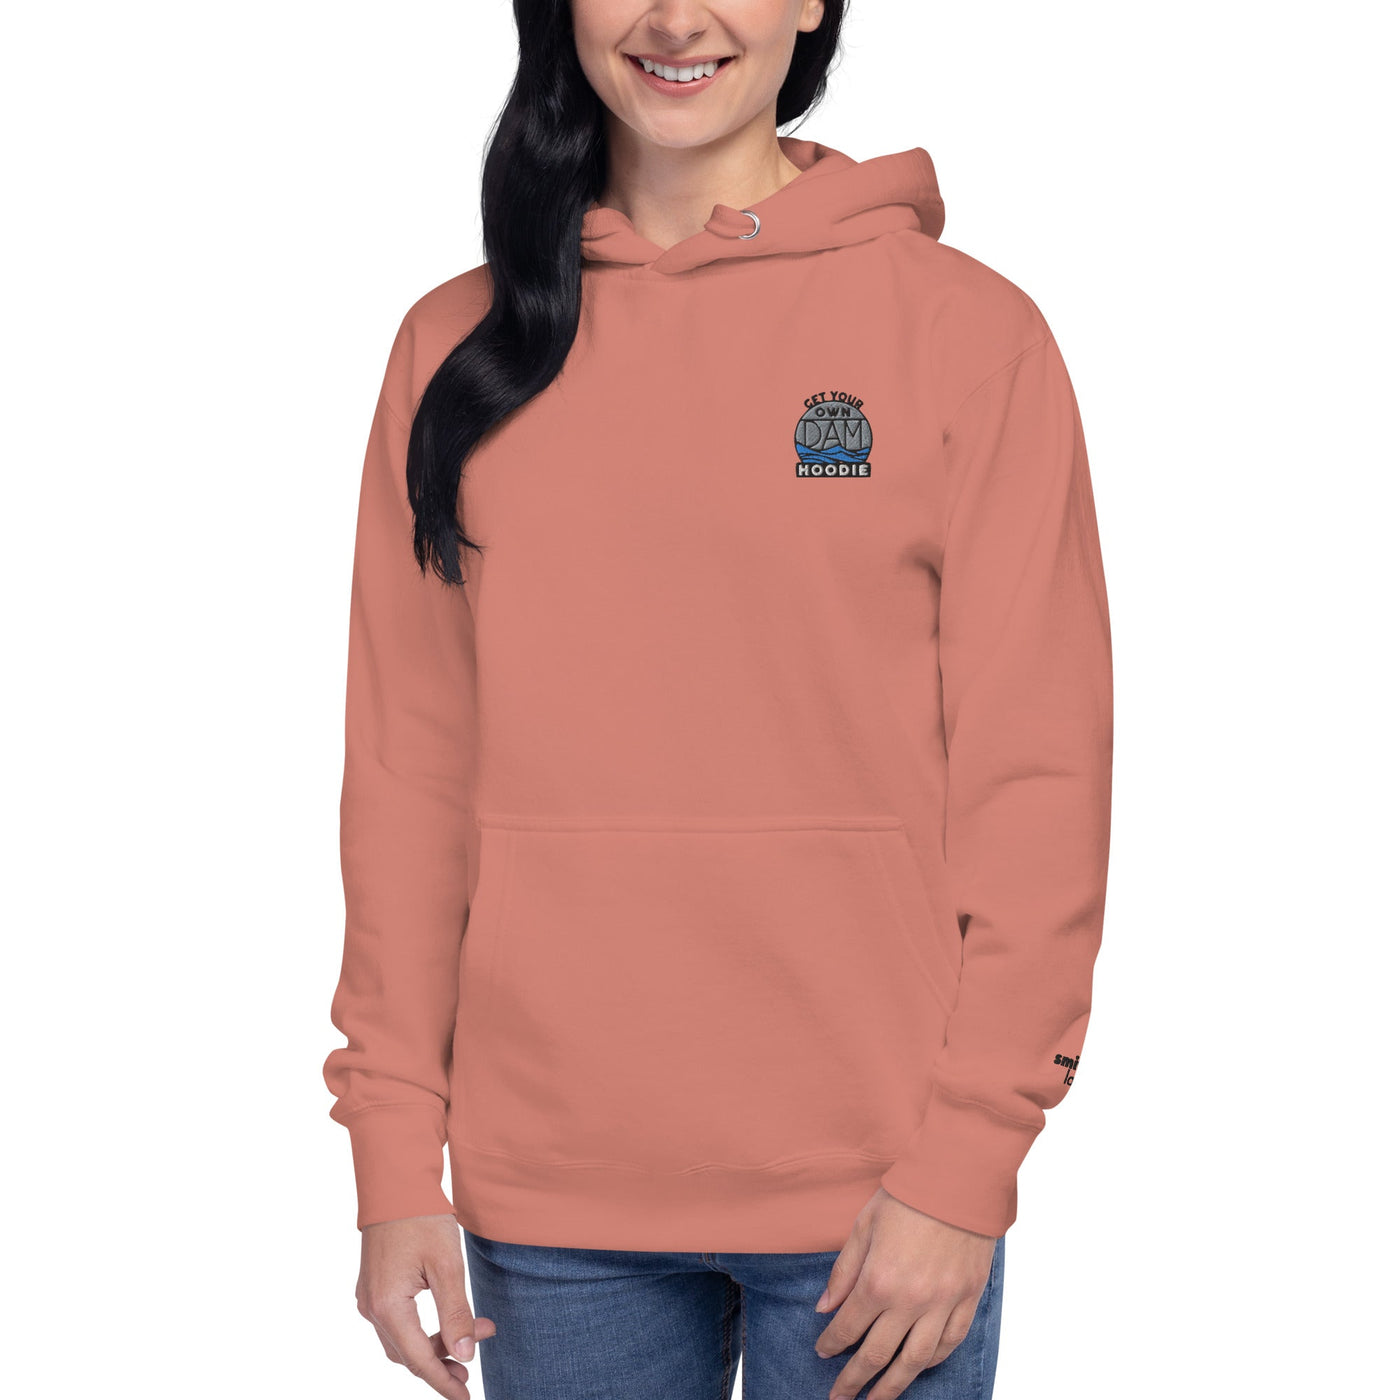 Smith Lake + Get Your Own Dam Hoodie Embroidery - Ezra's Clothing